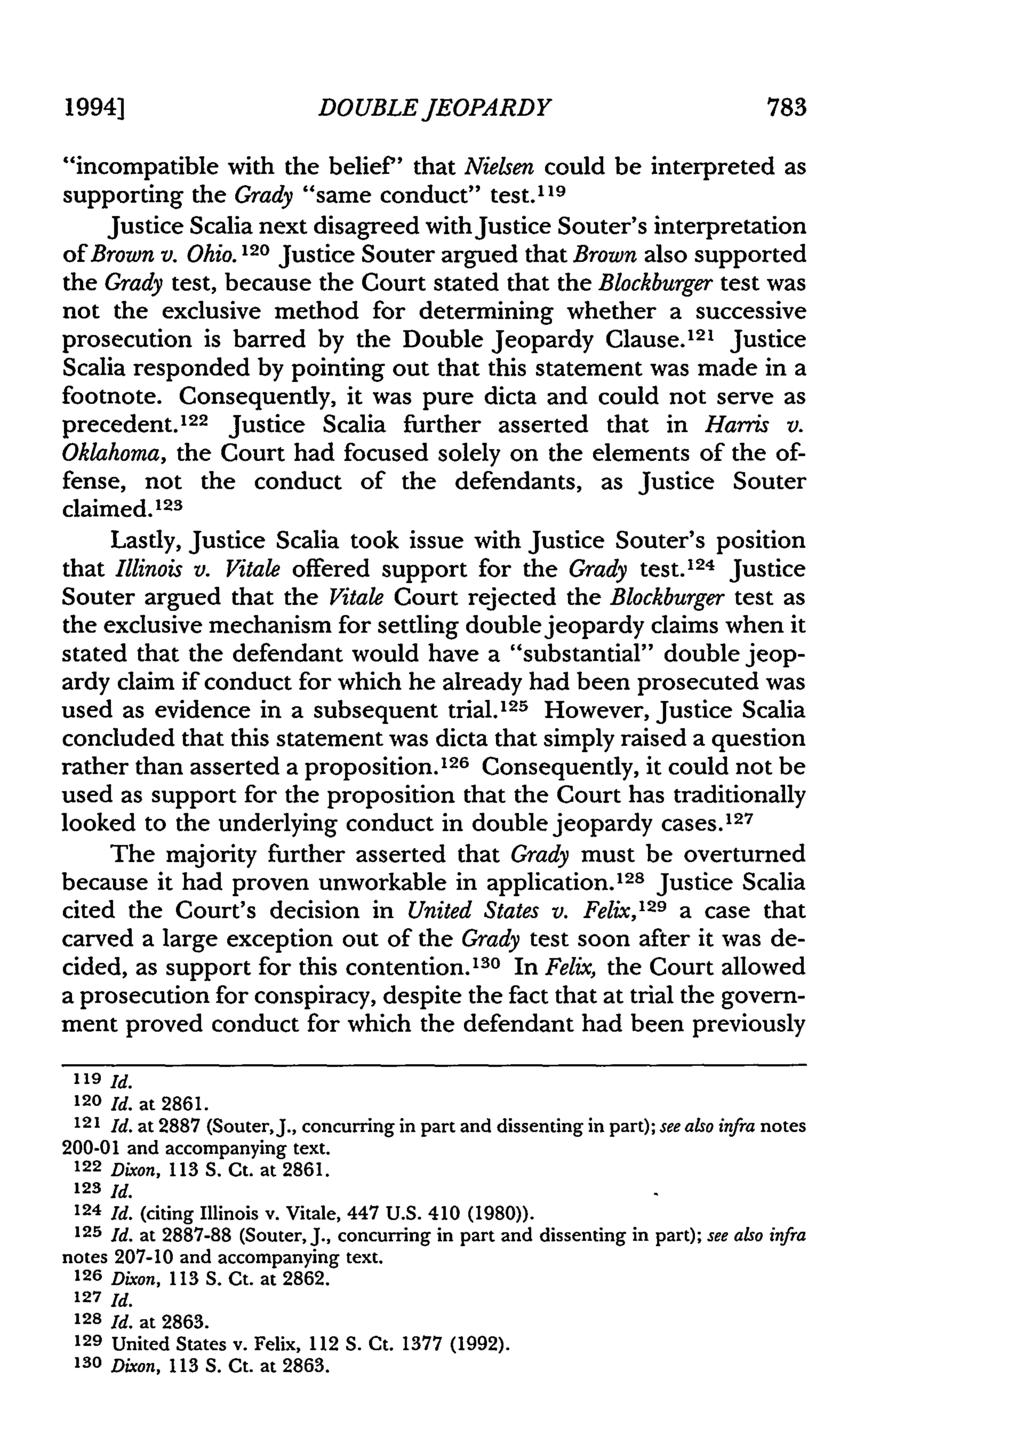 1994] DOUBLE JEOPARDY "incompatible with the belief' that Nielsen could be interpreted as supporting the Grady "same conduct" test.